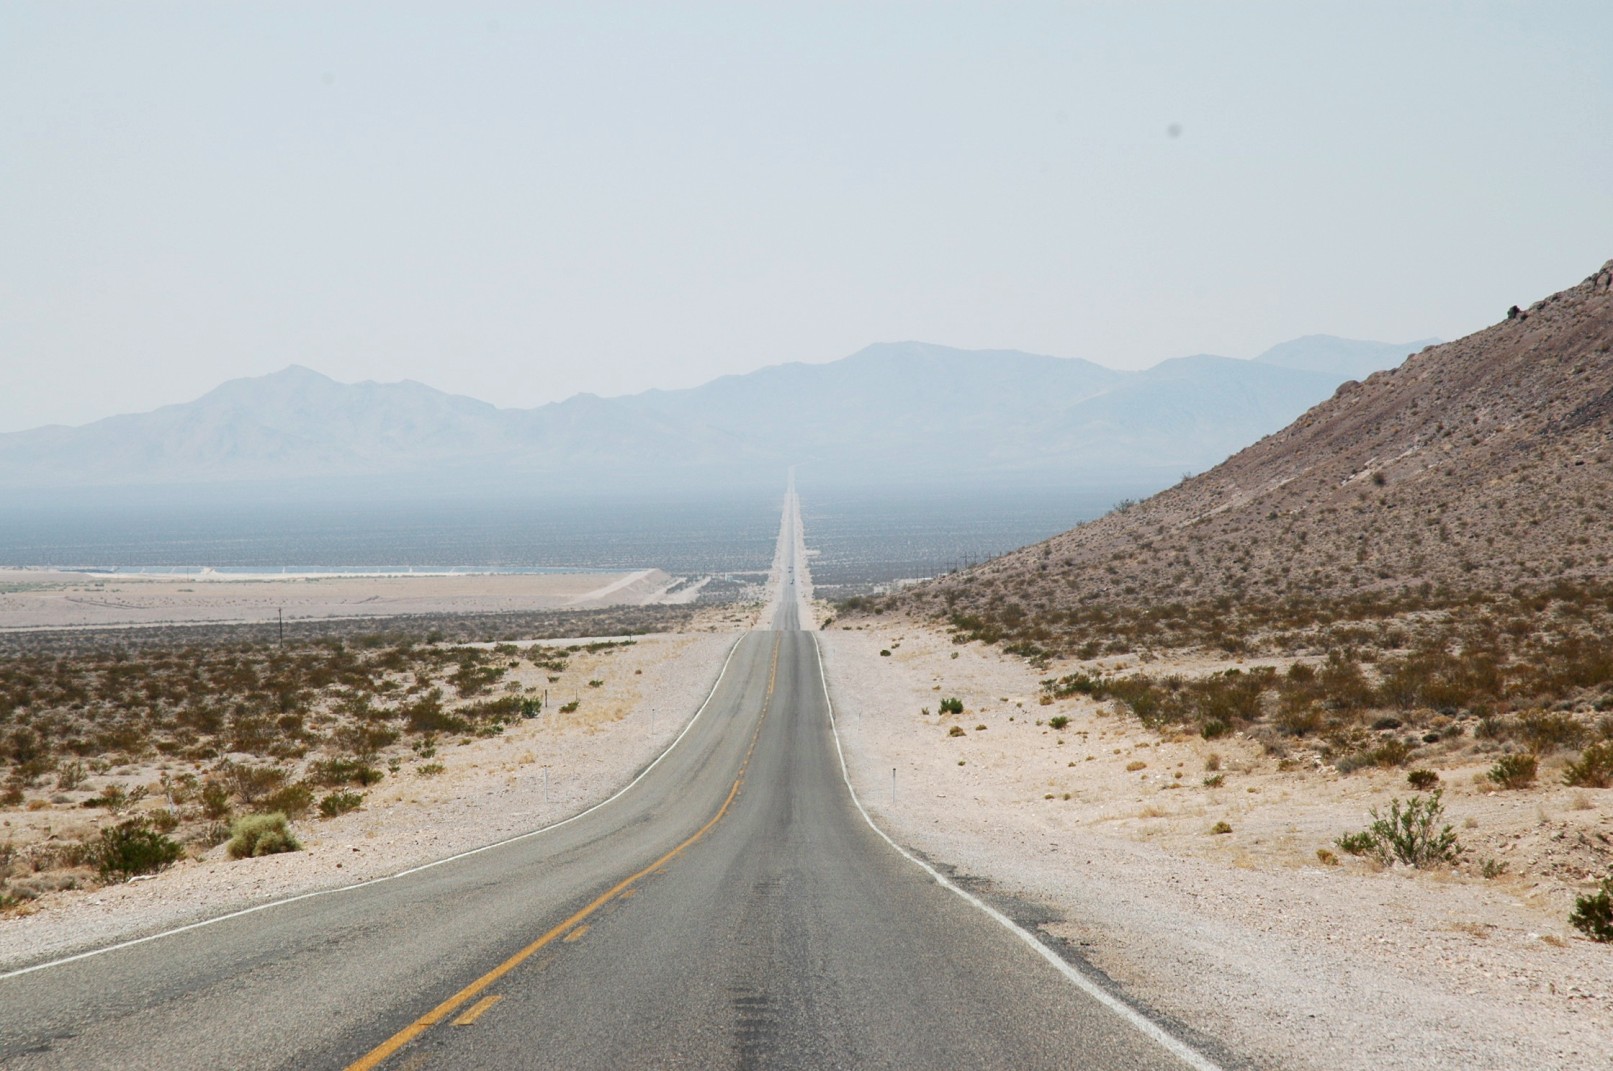 an empty road on the side of a desert with mountains in the distance